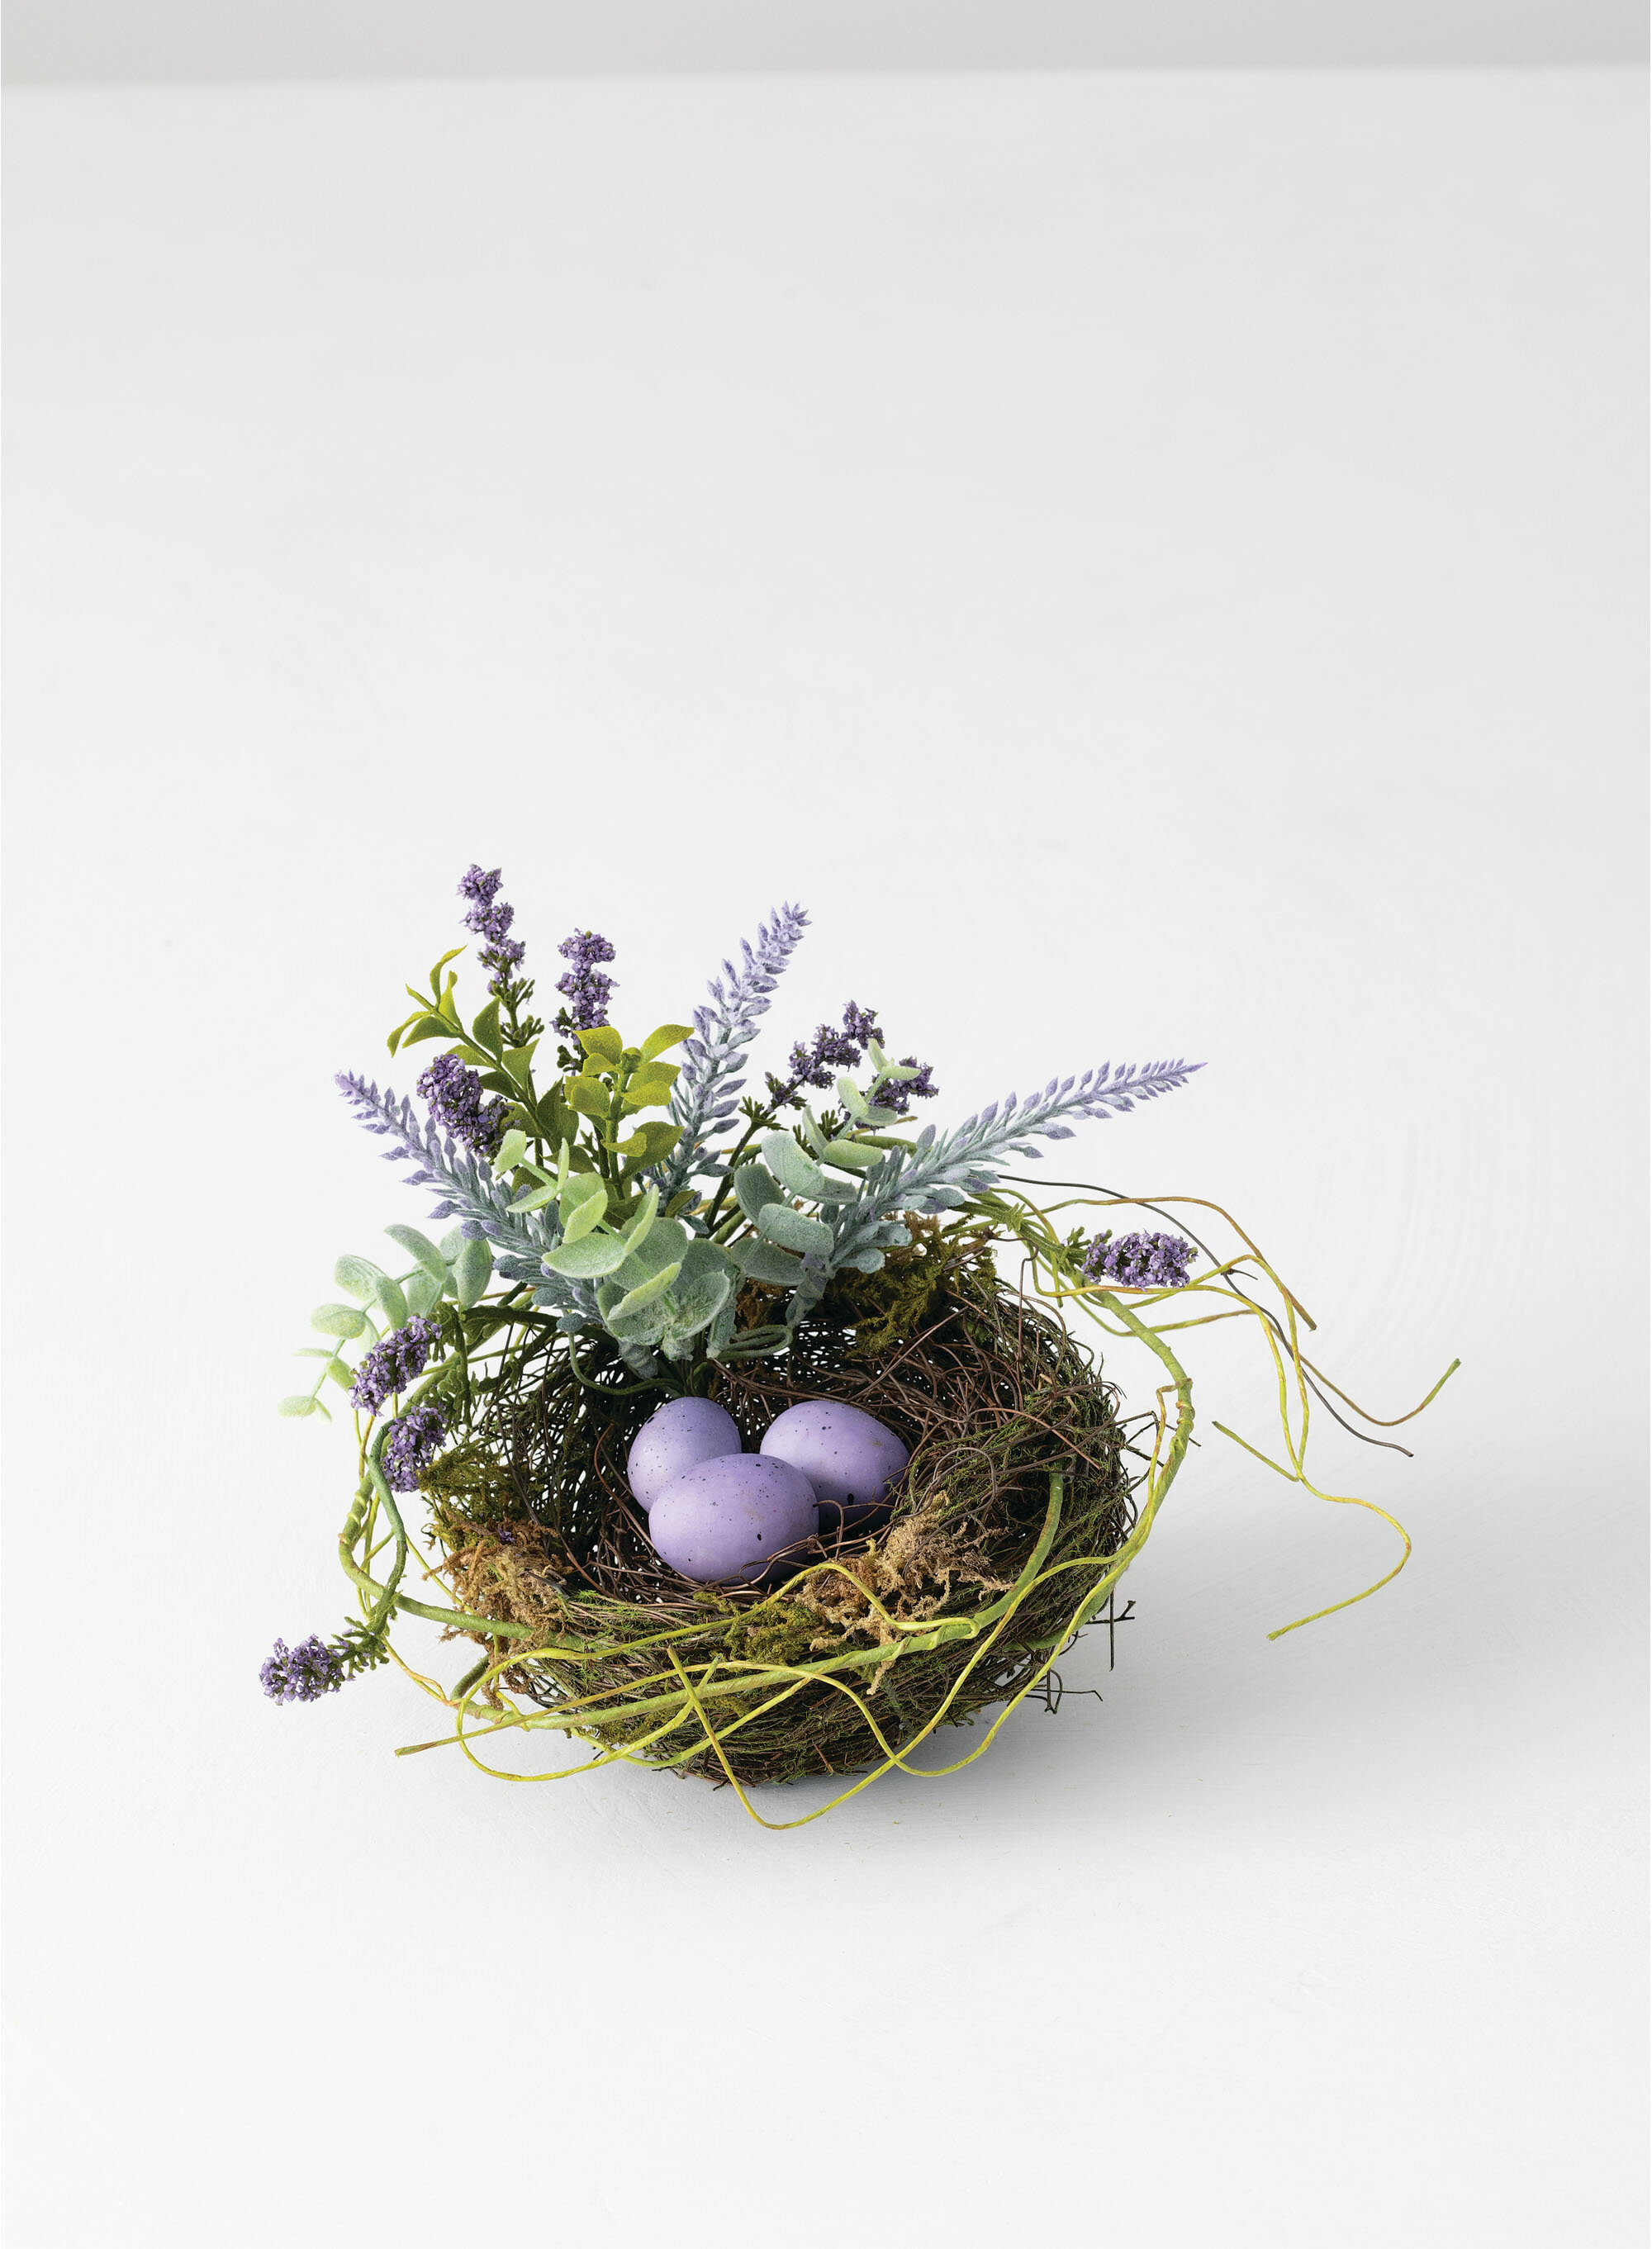 4' Egg and Wildflower Garland by Valerie 